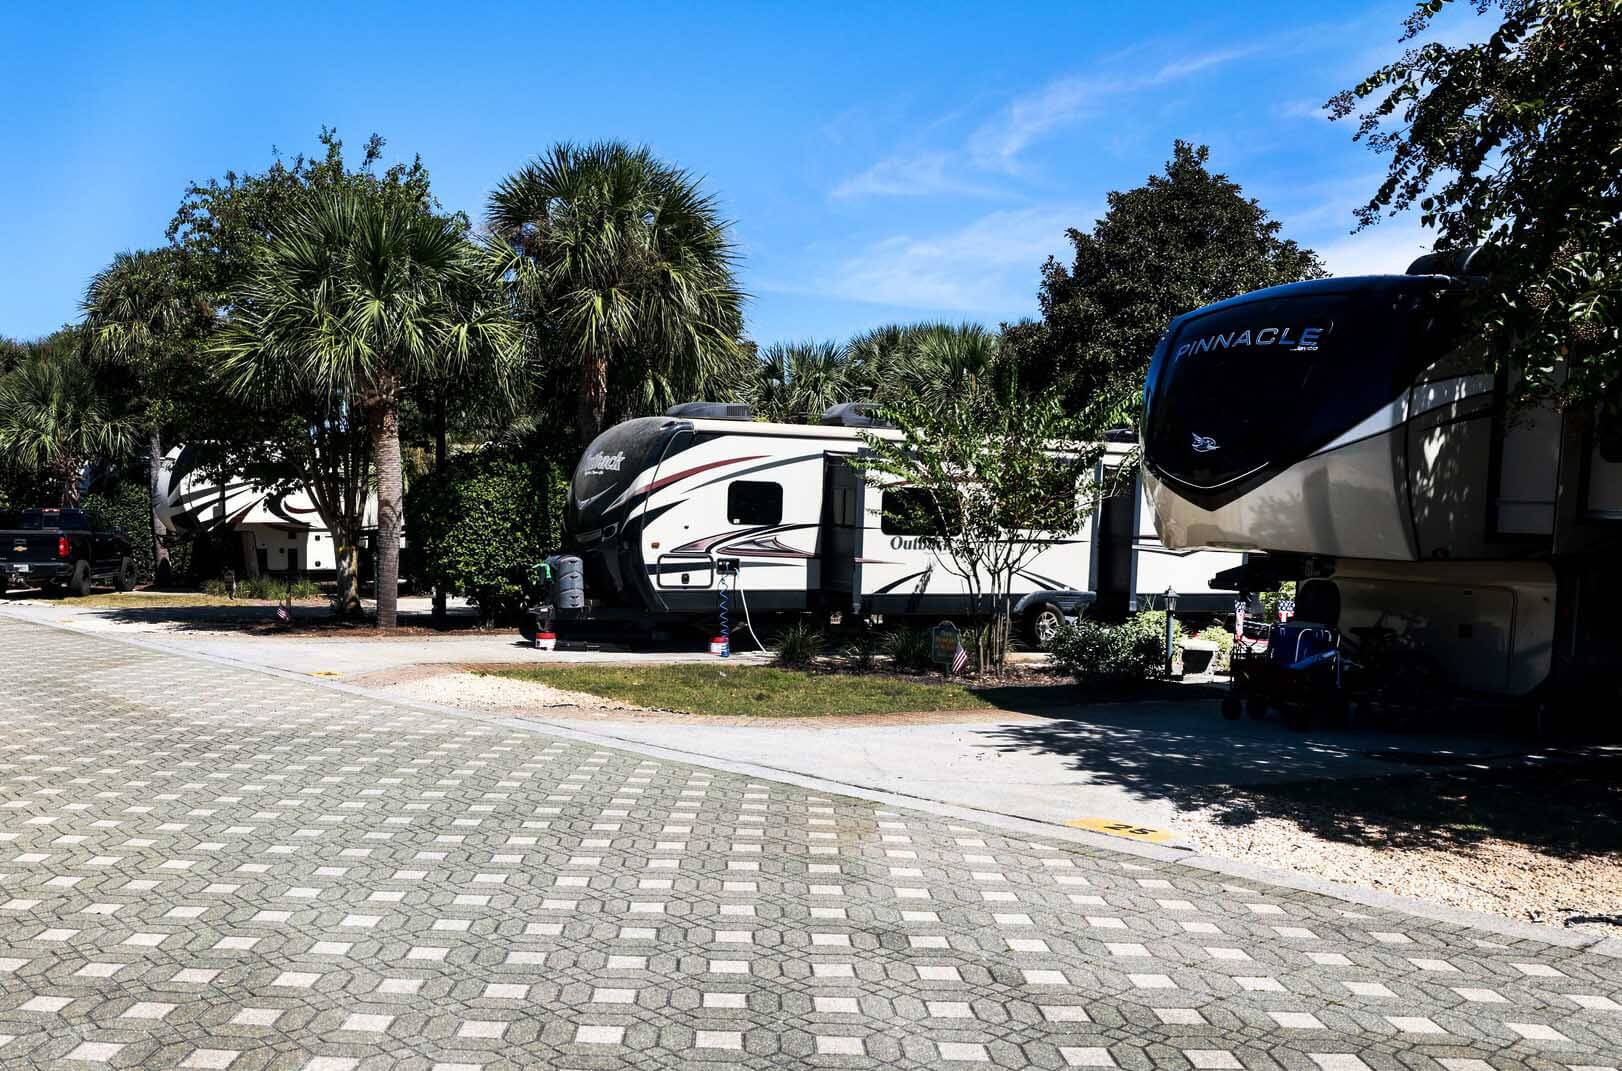 8 Best Rv Resorts And Parks In Florida